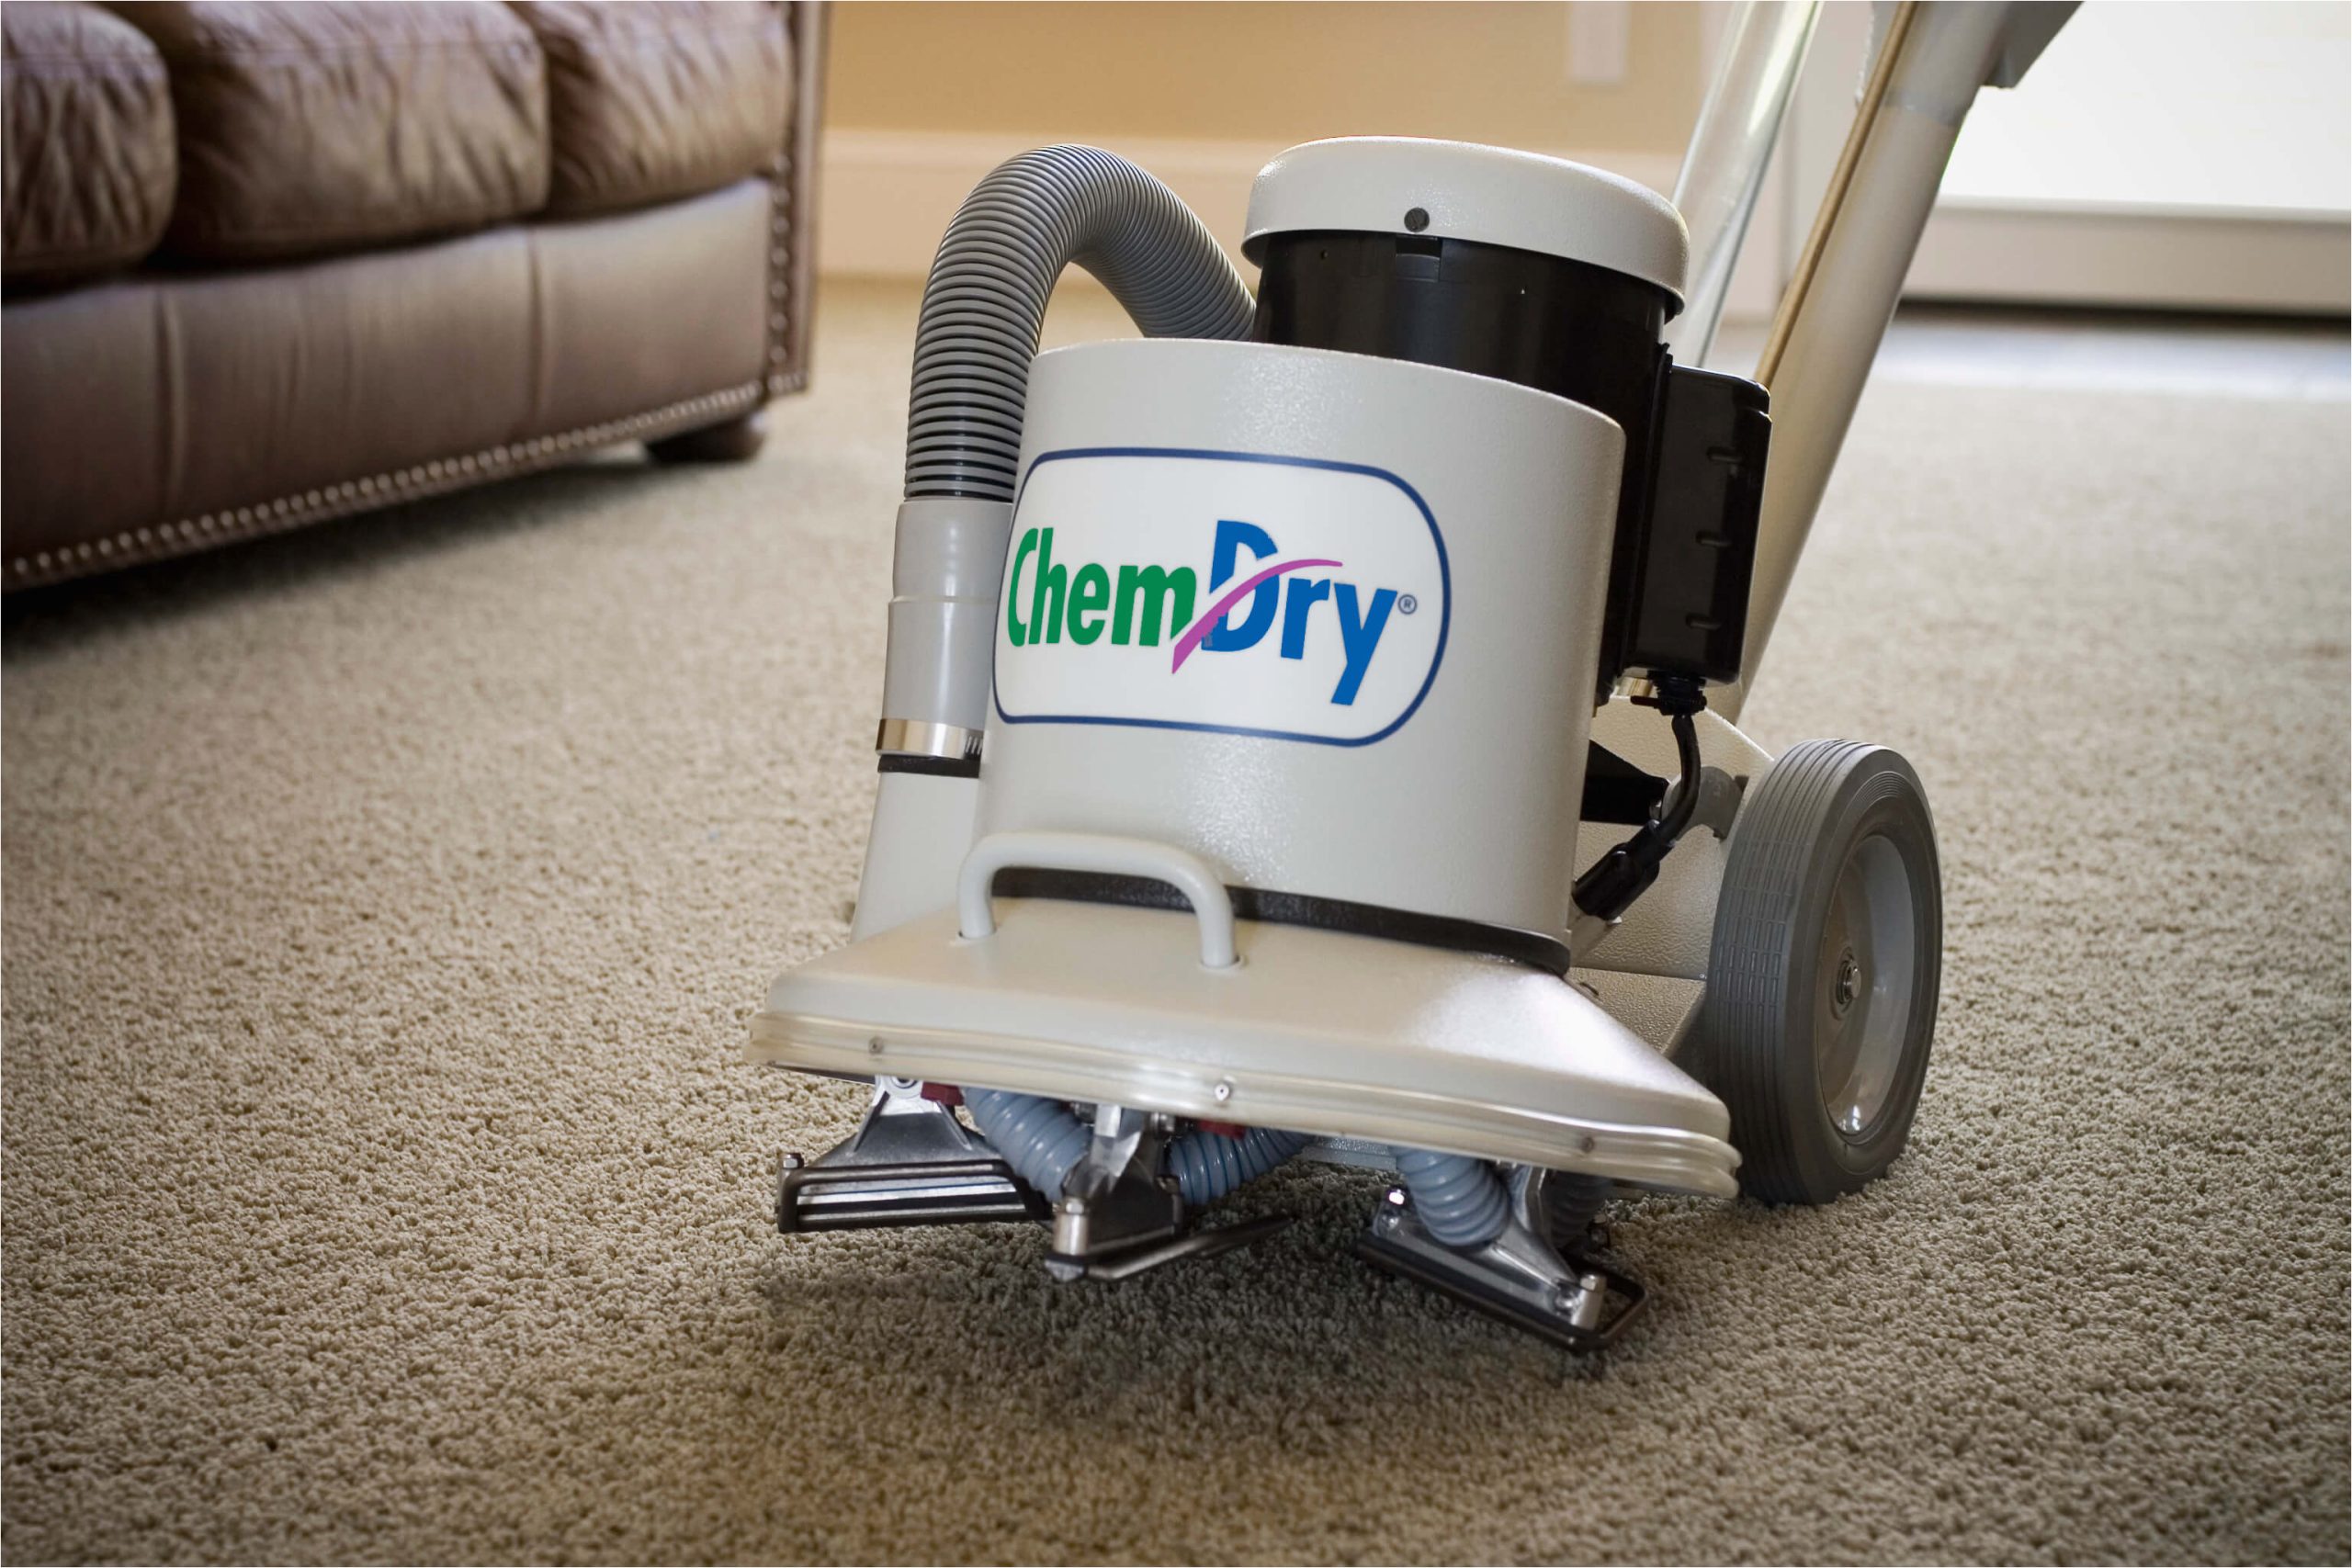 Chem Dry area Rug Cleaning Steam Carpet Cleaning Tnt Chem-dry